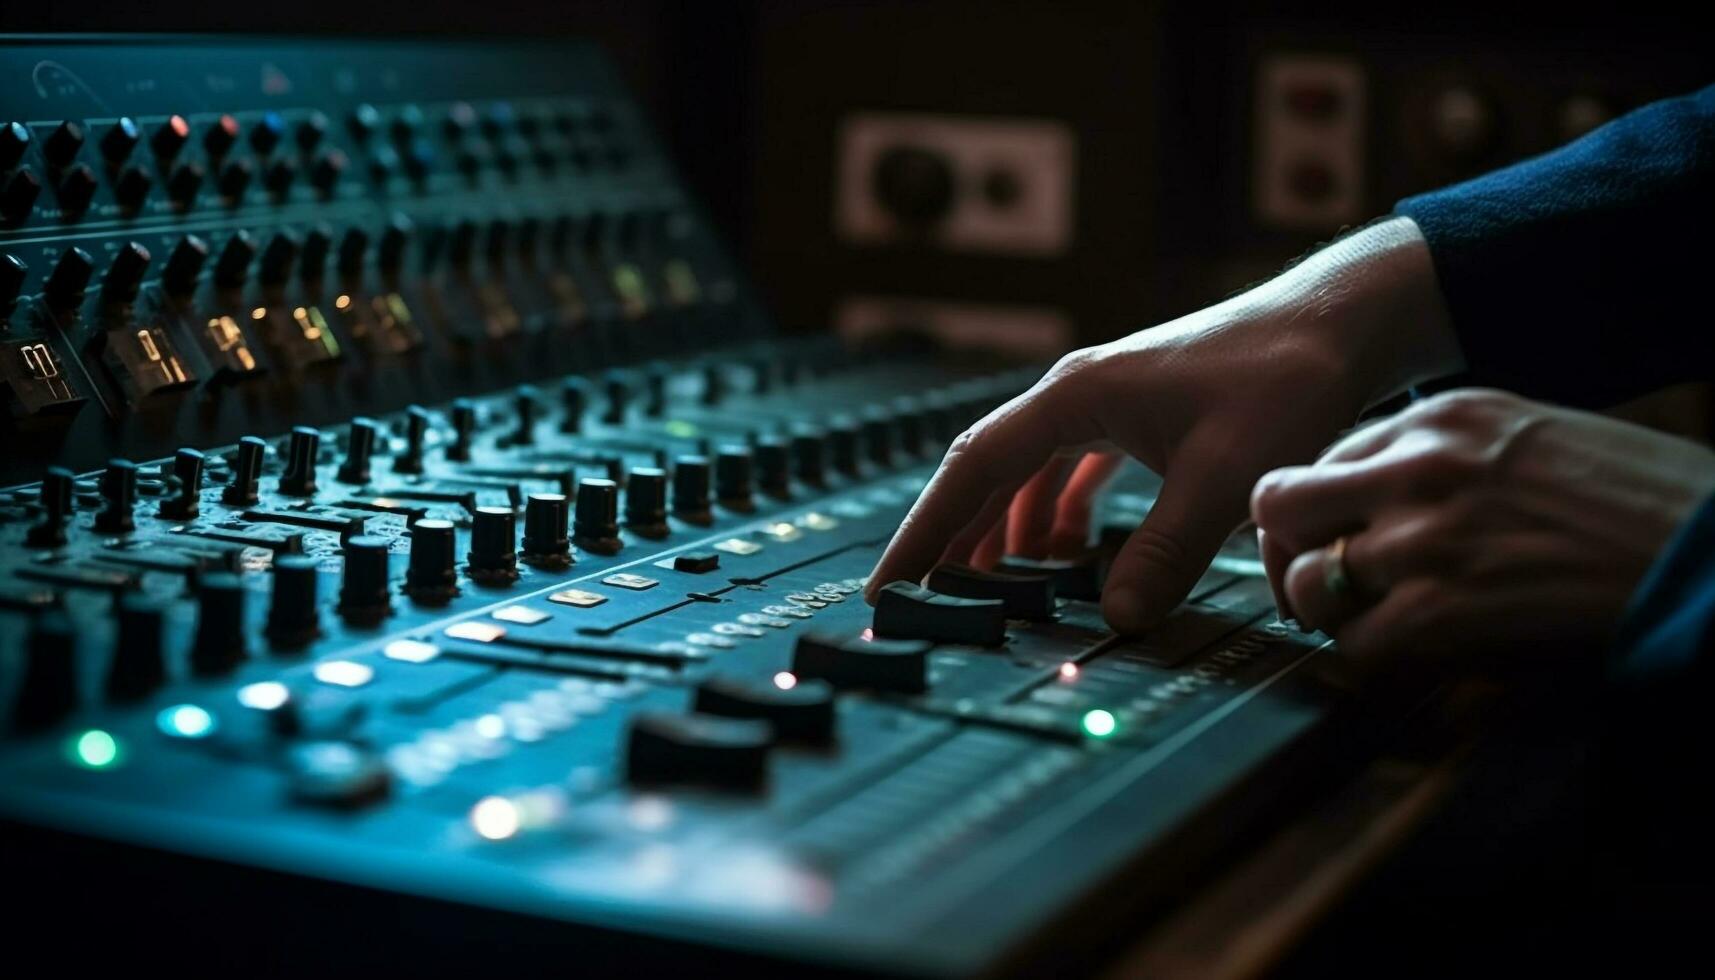 Sound engineer adjusting knobs on mixing board generated by AI photo